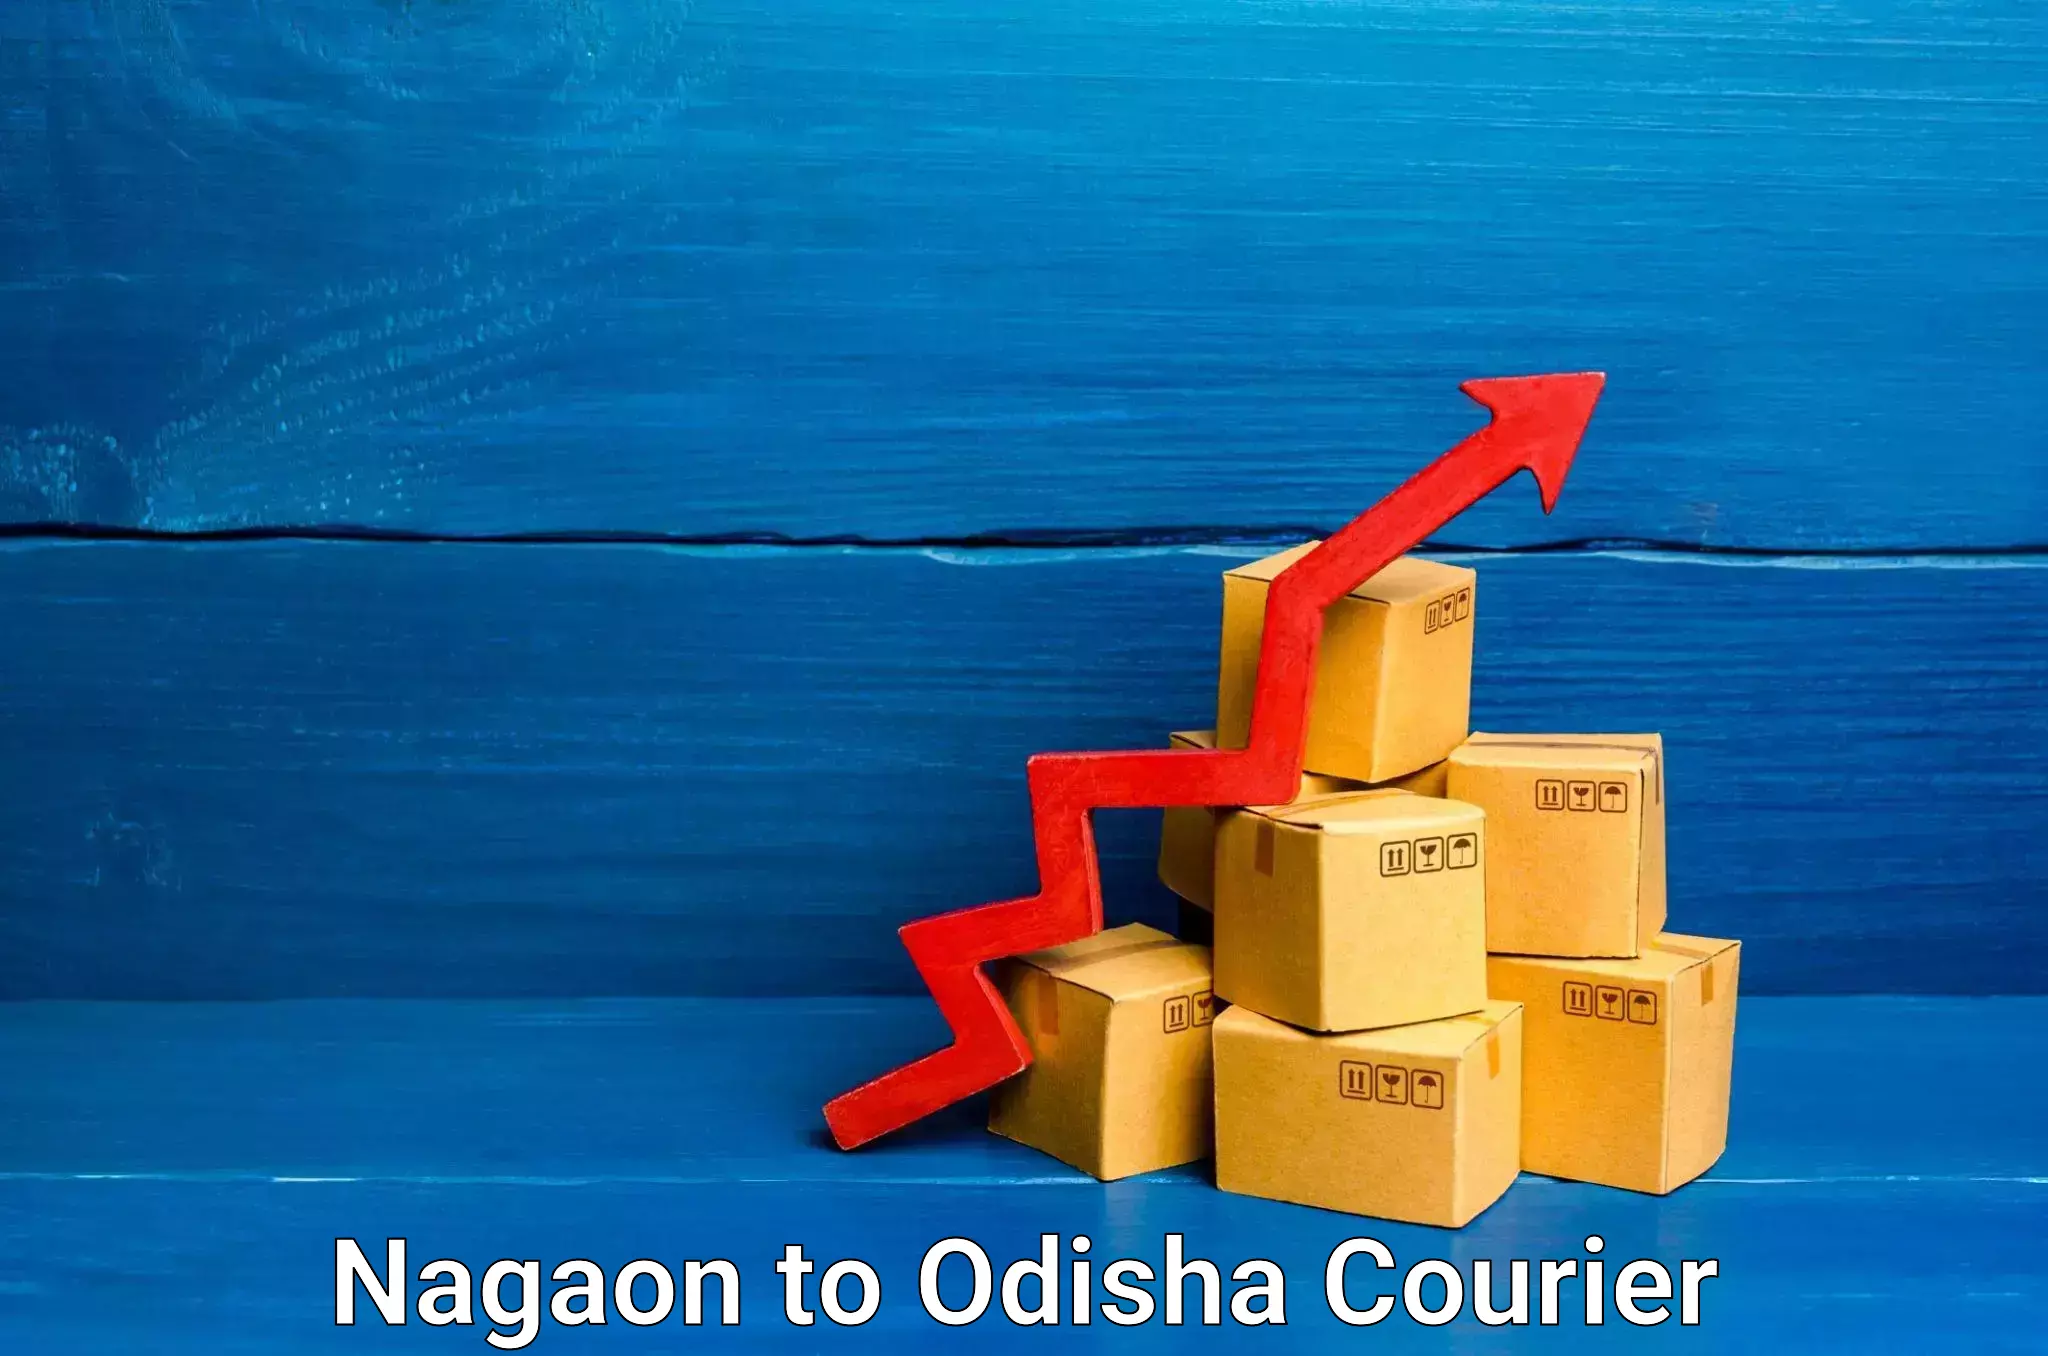 Cargo delivery service Nagaon to Angul